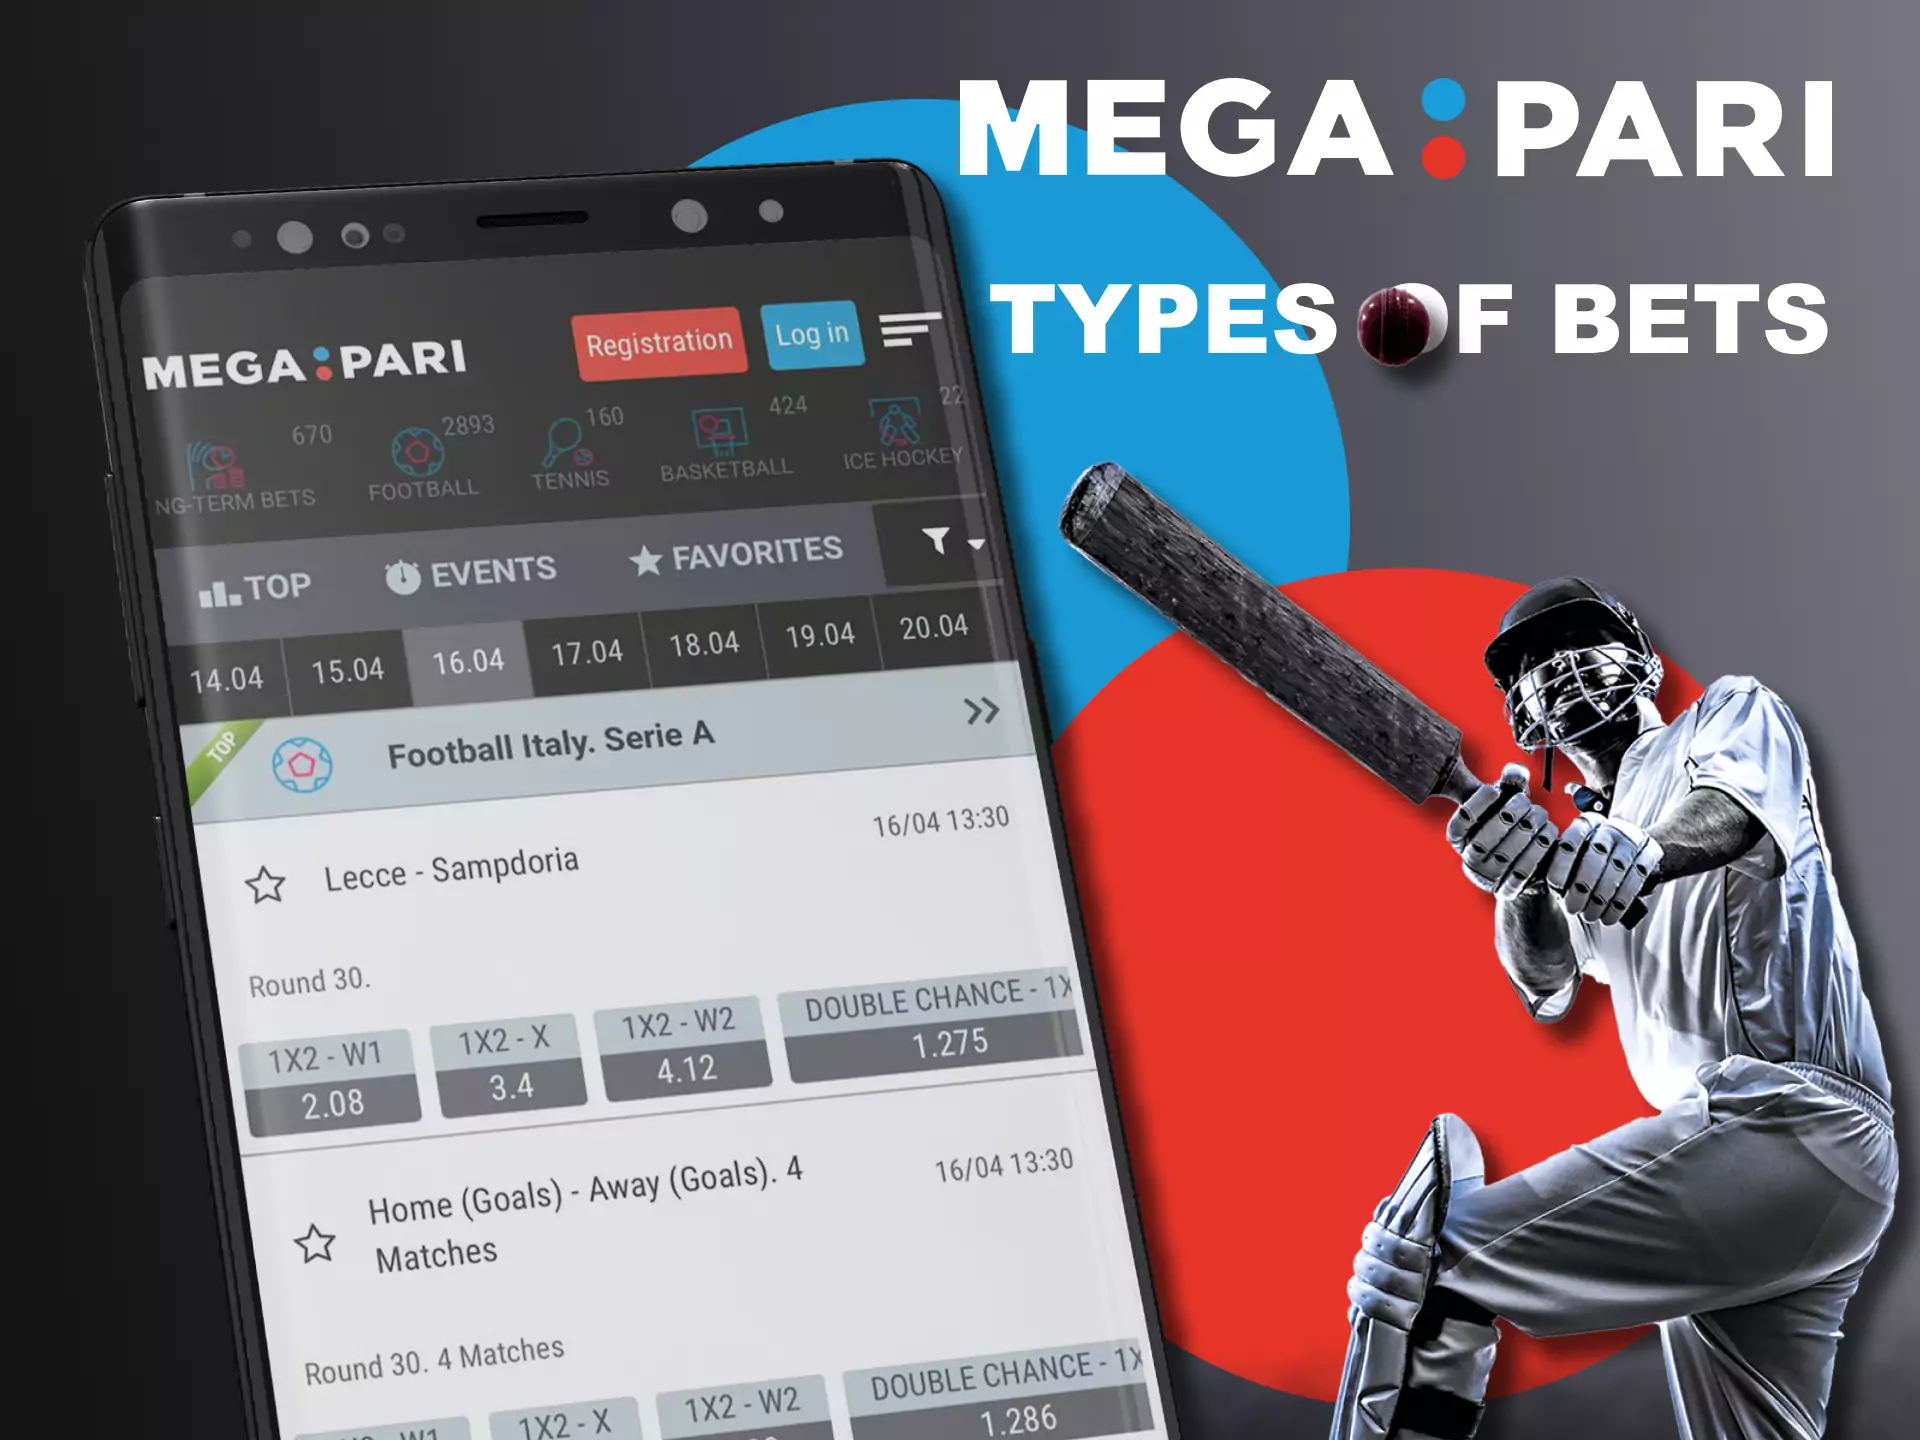 With the Megapari app, try different types of bets.